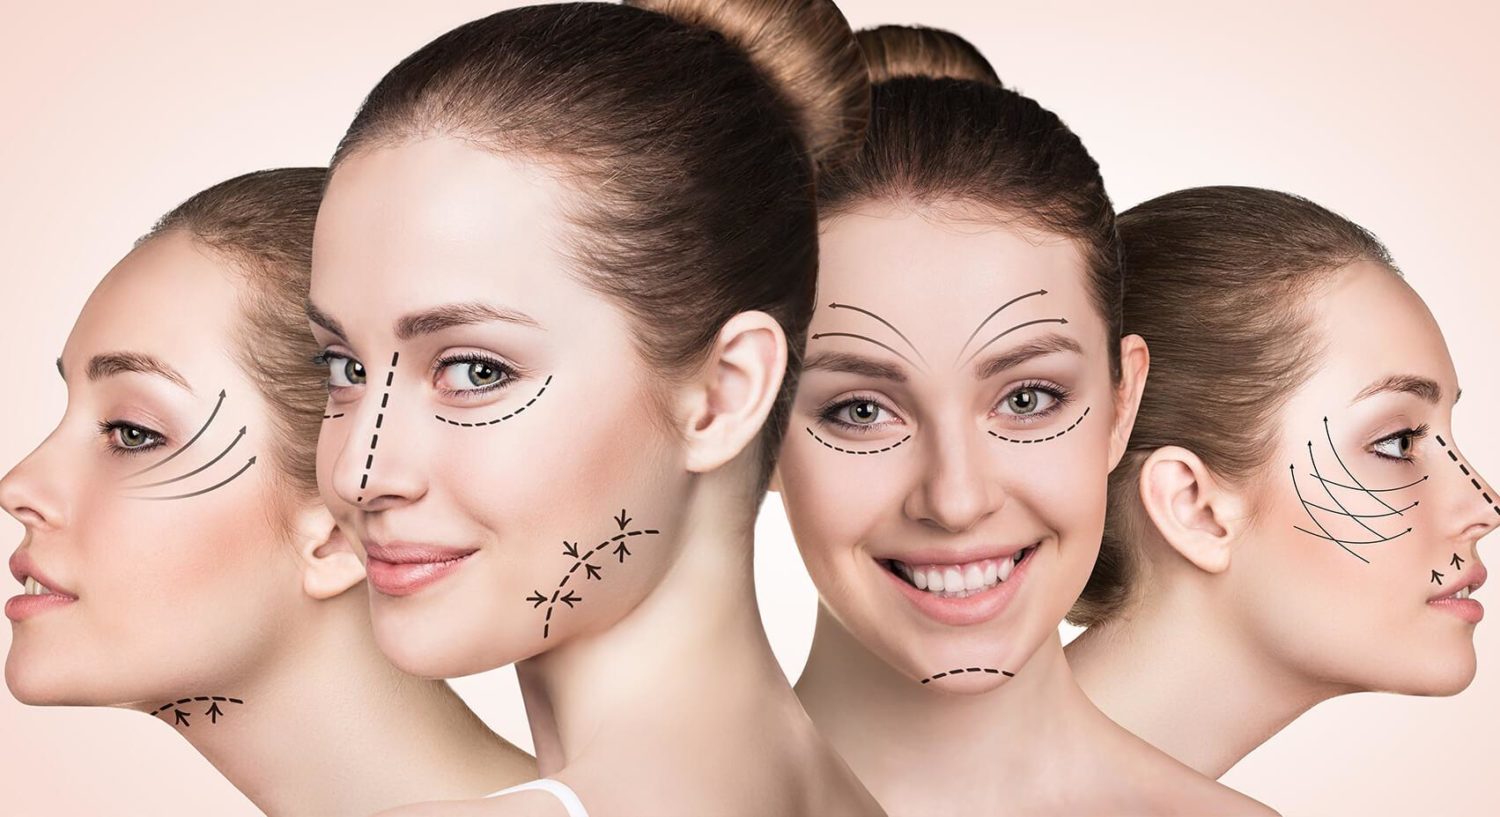 5 Most Common Plastic Surgery Myths & Facts